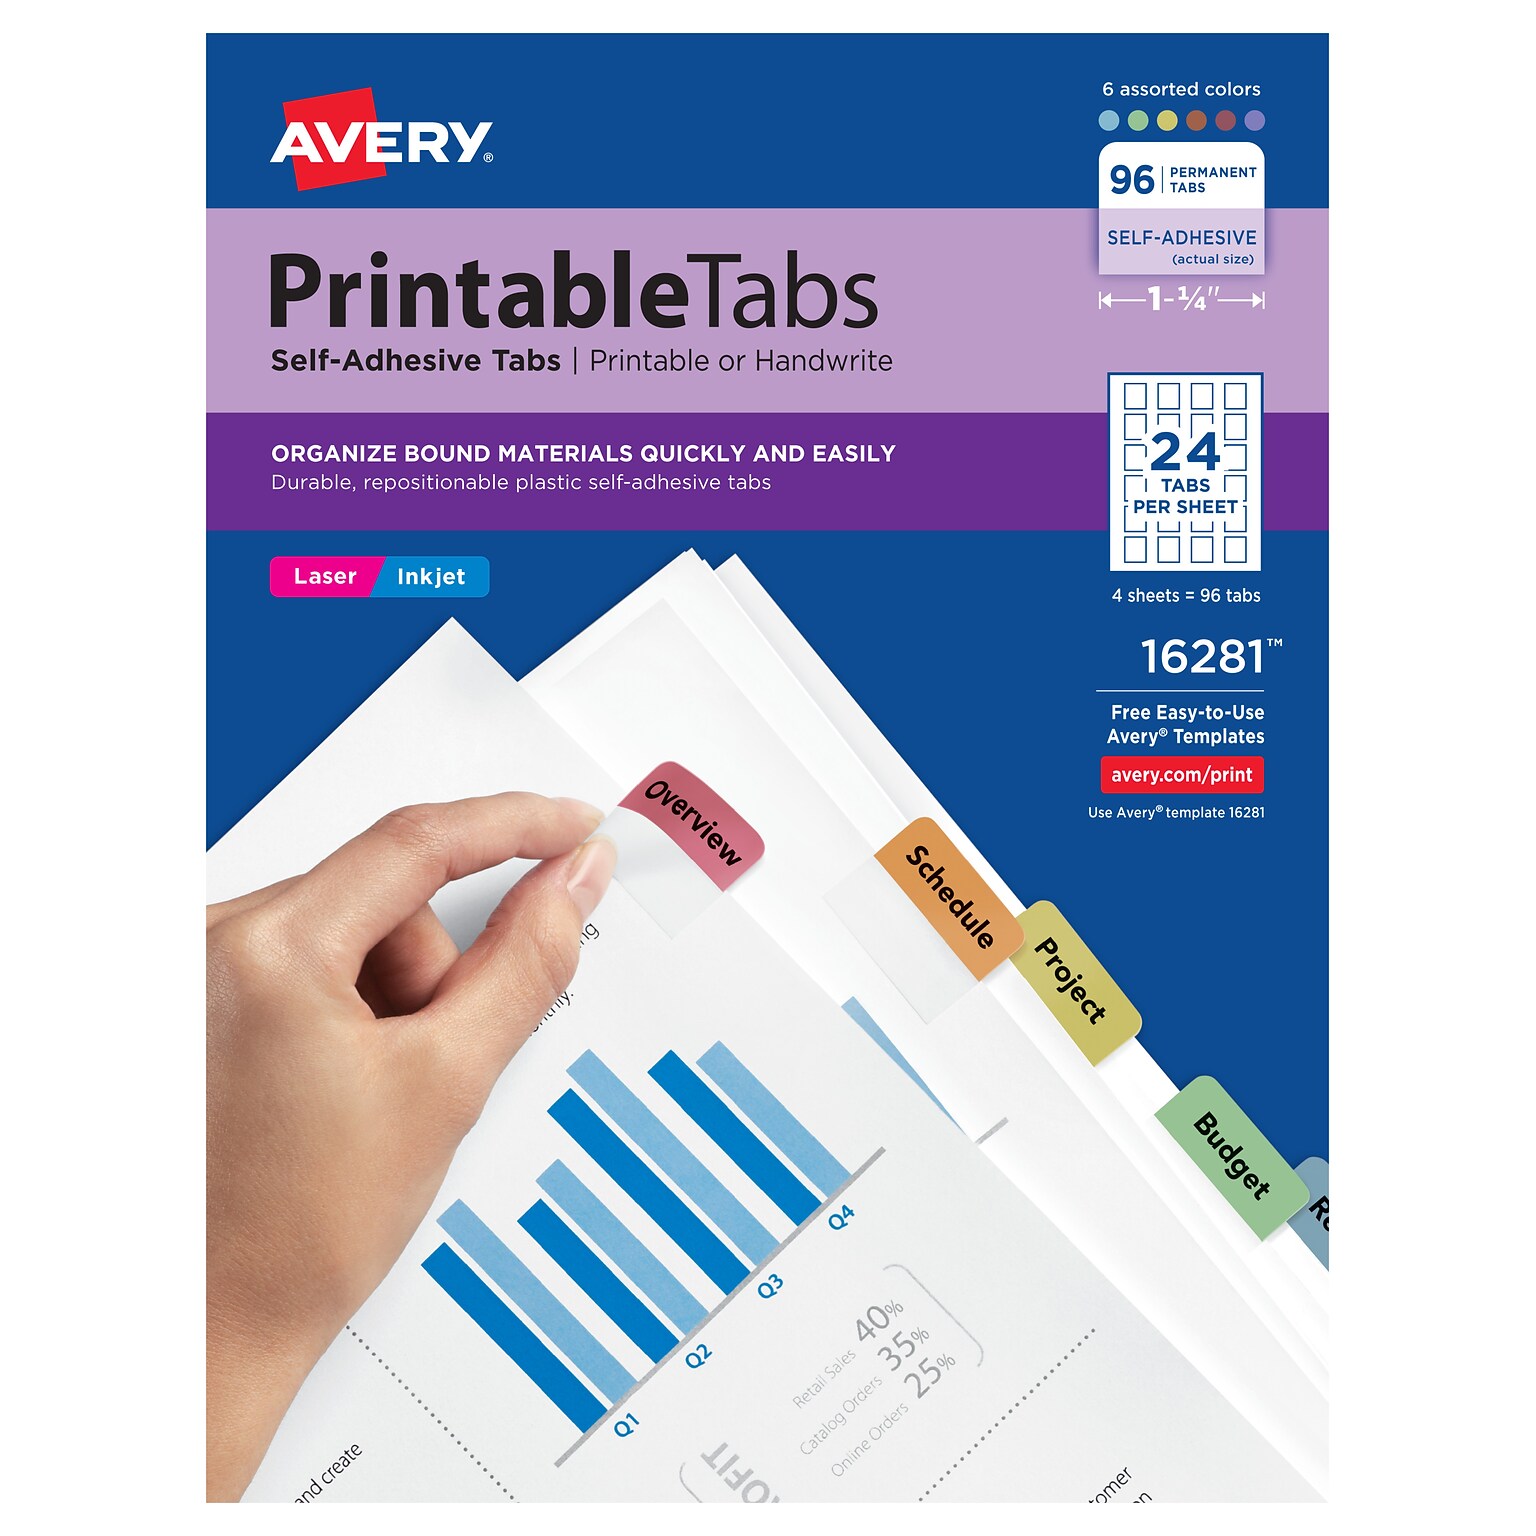 Avery Printable Self-Adhesive Plastic Tabs, 1-1/4, Assorted Colors, 96/Pack (16281)